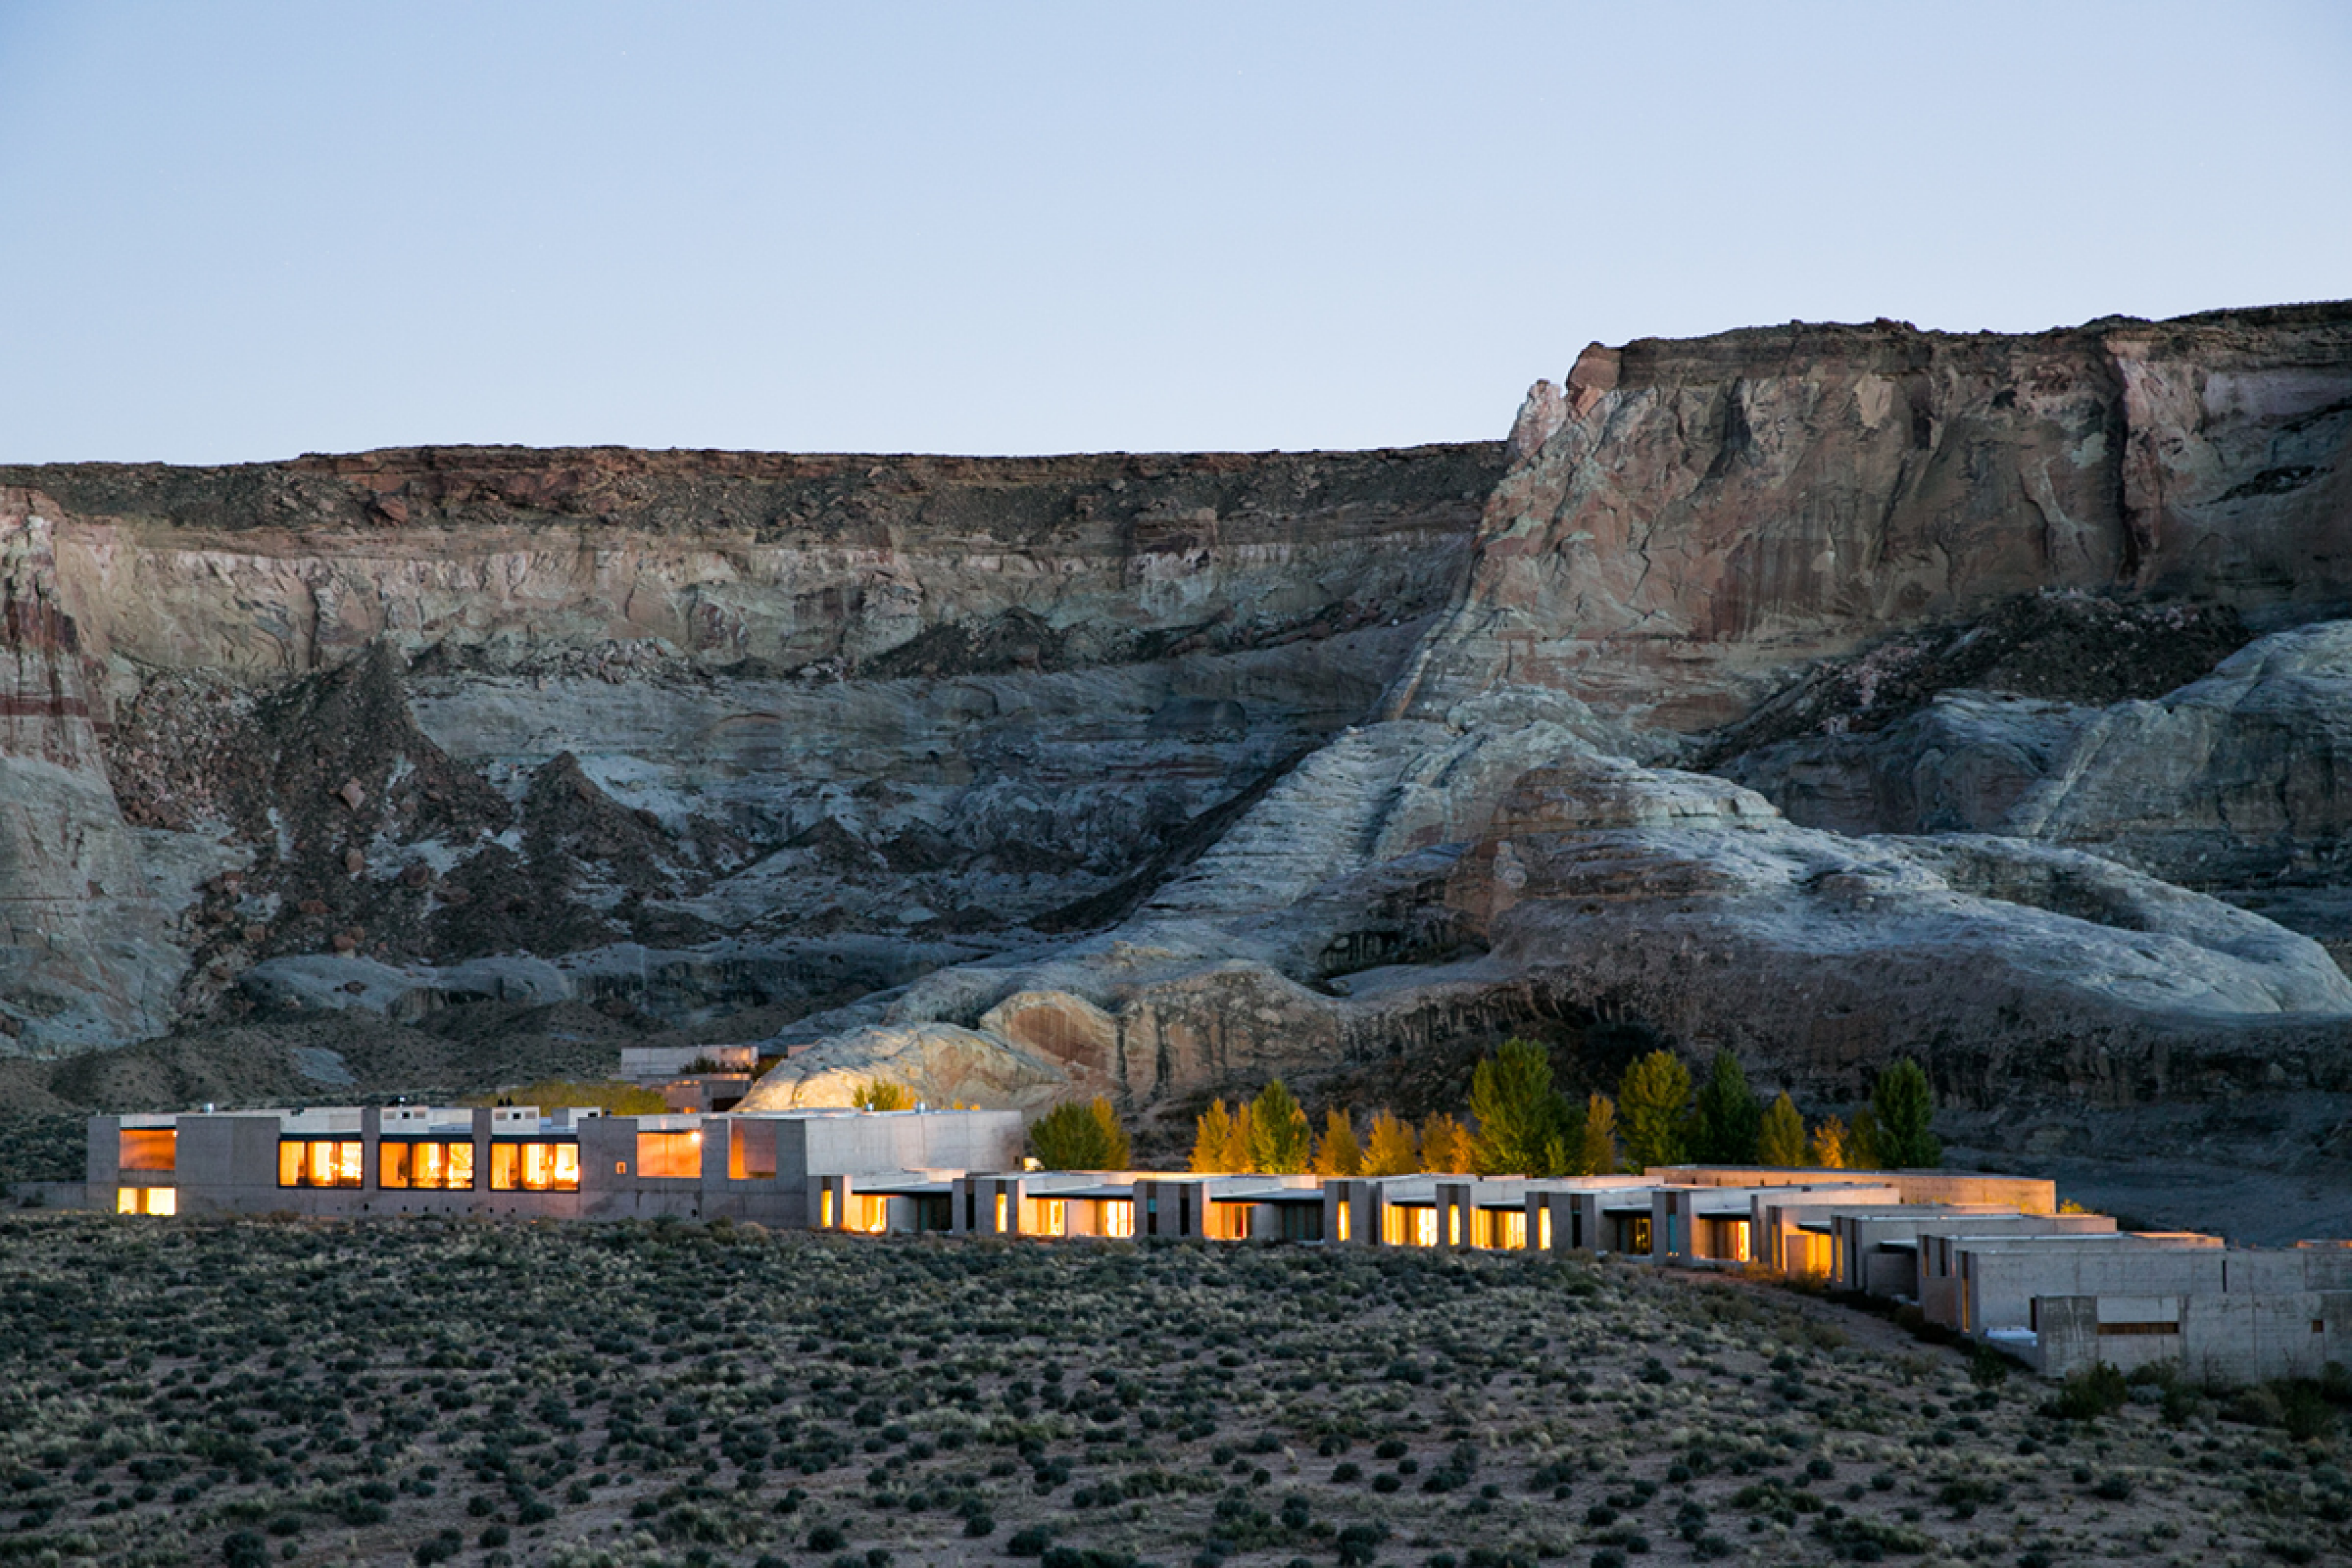 View of the hotel lit up at dusk. The desert setting and remoteness of the location.